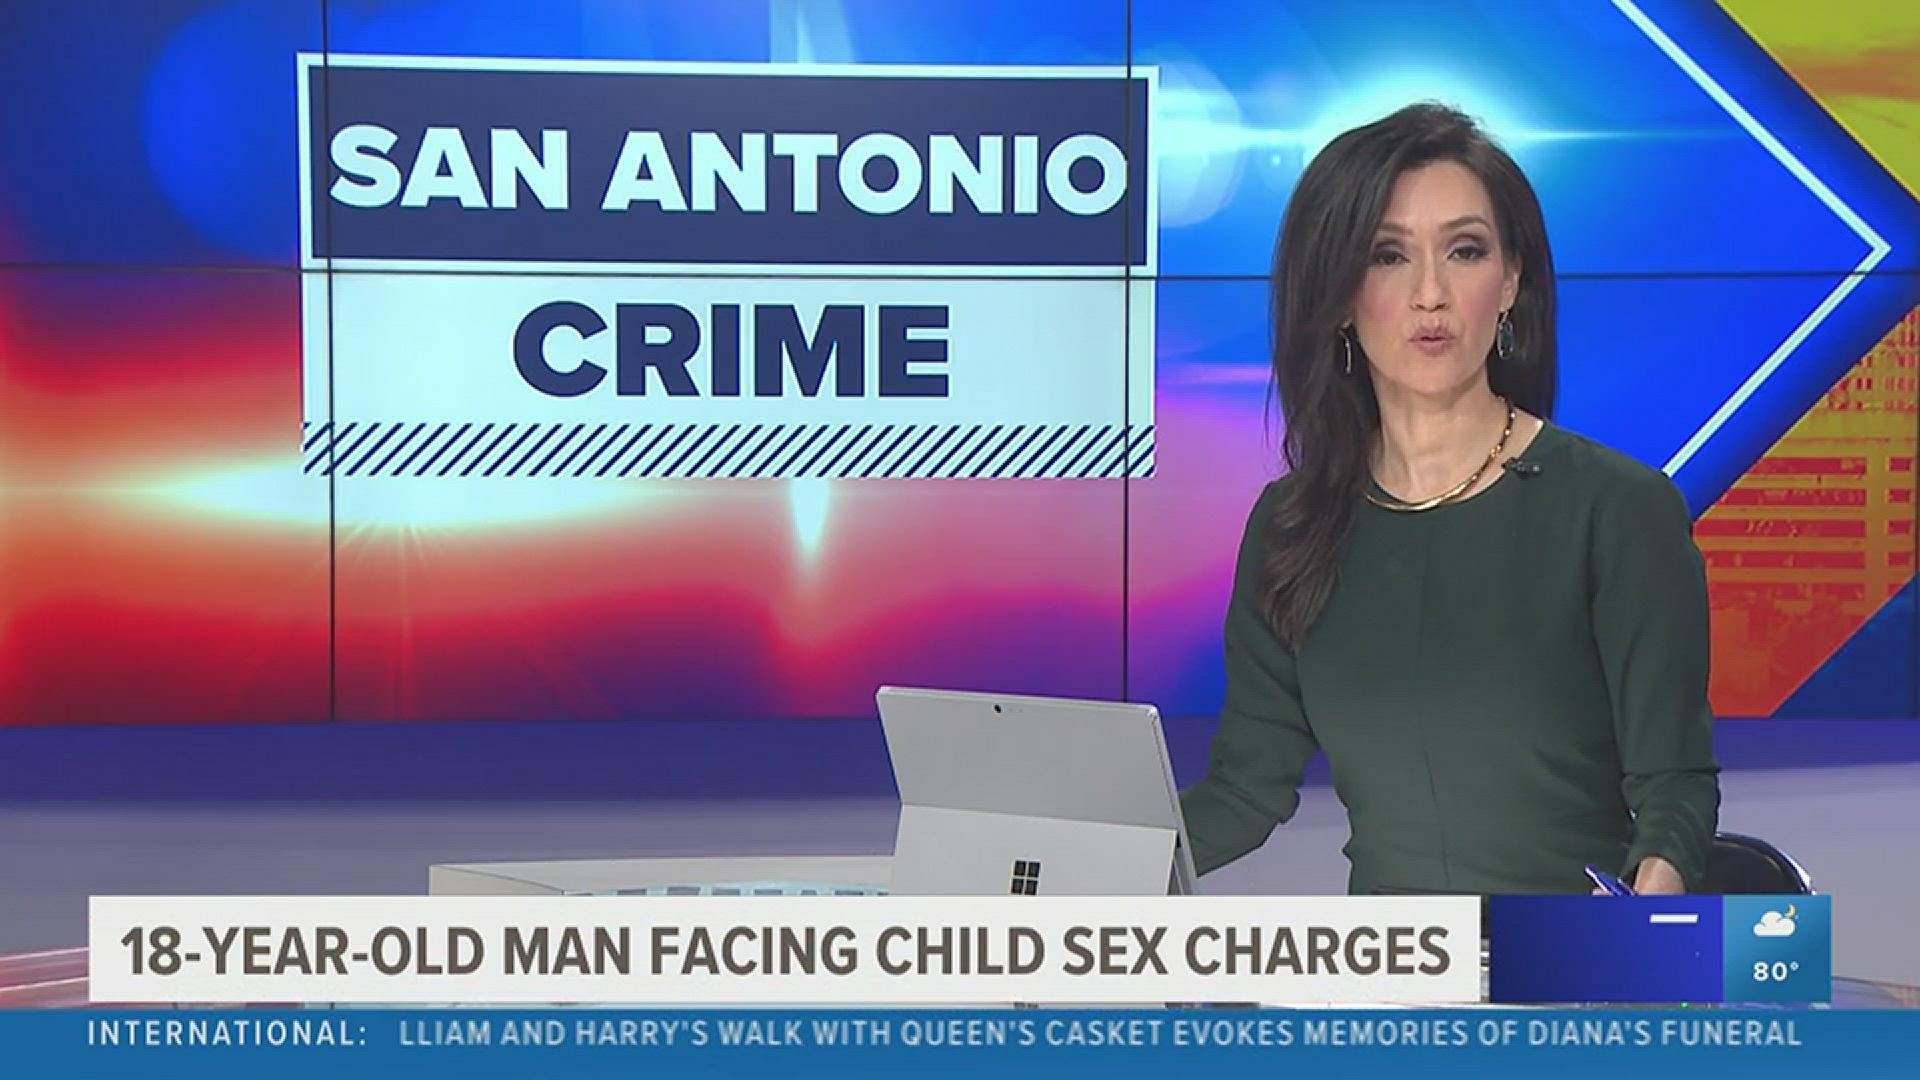 18-year-old arrested and facing three child sex charges | kens5.com